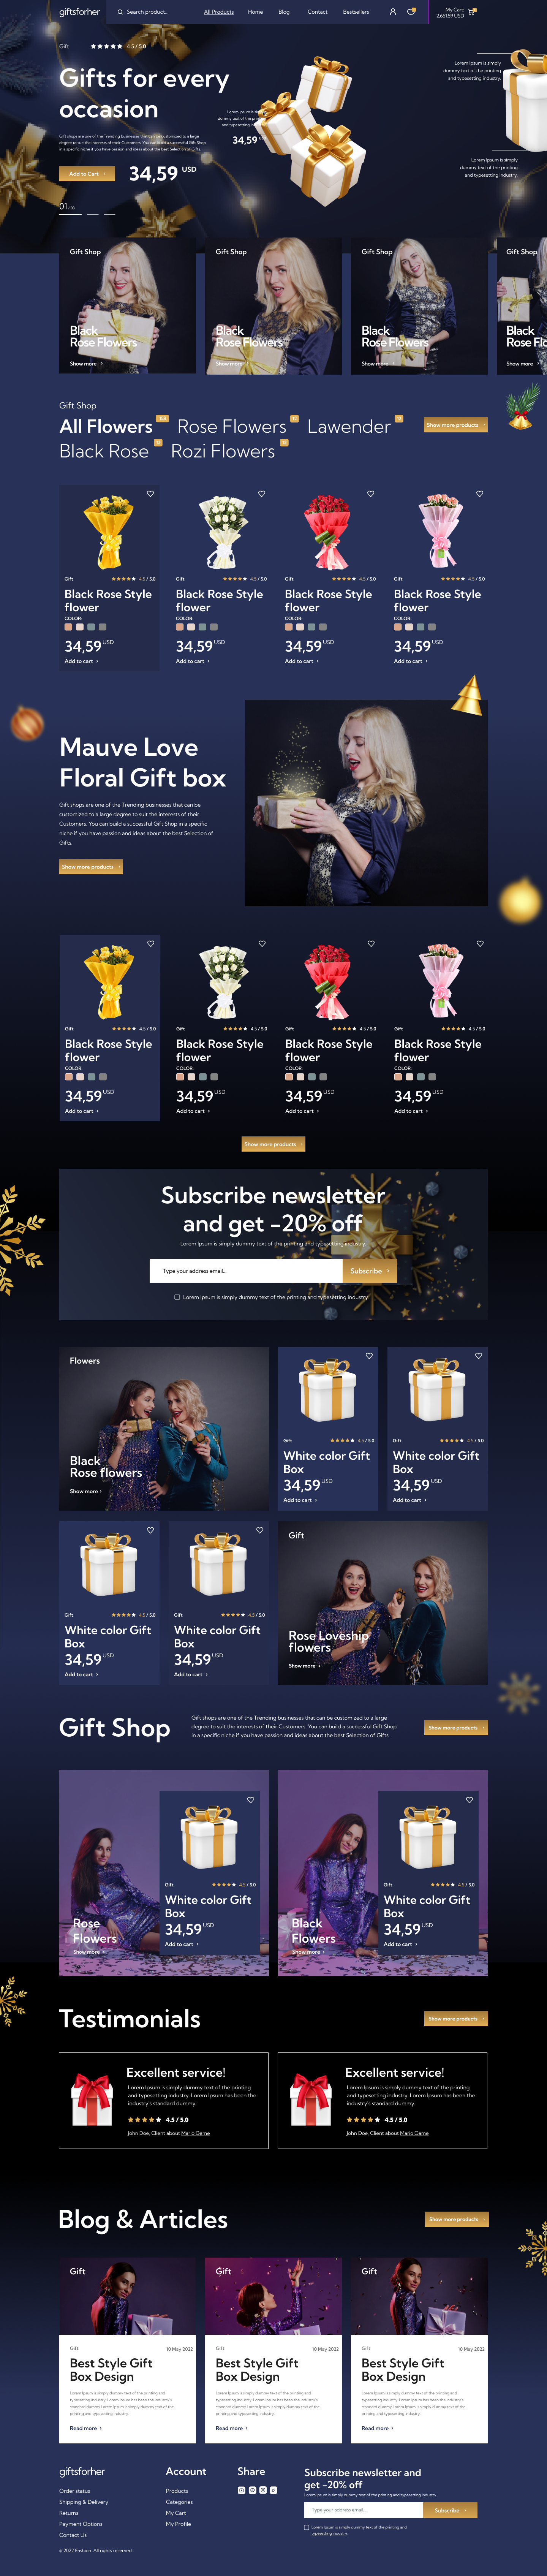 Gifts For Her WordPress Theme-WorkDo